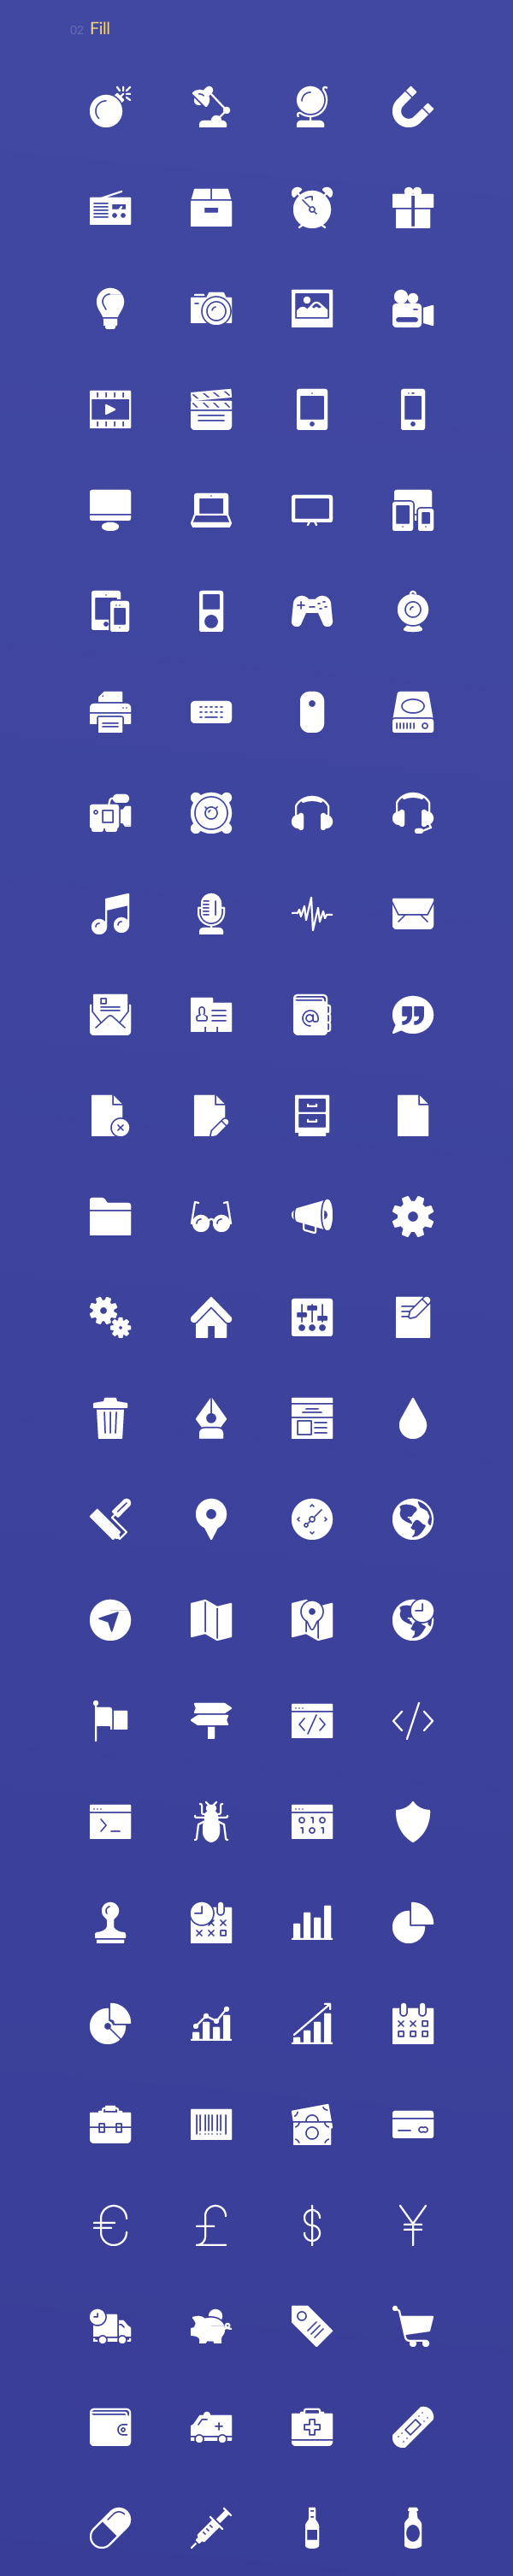 Webicons – Stroke & Fill Icons (100 Icons)